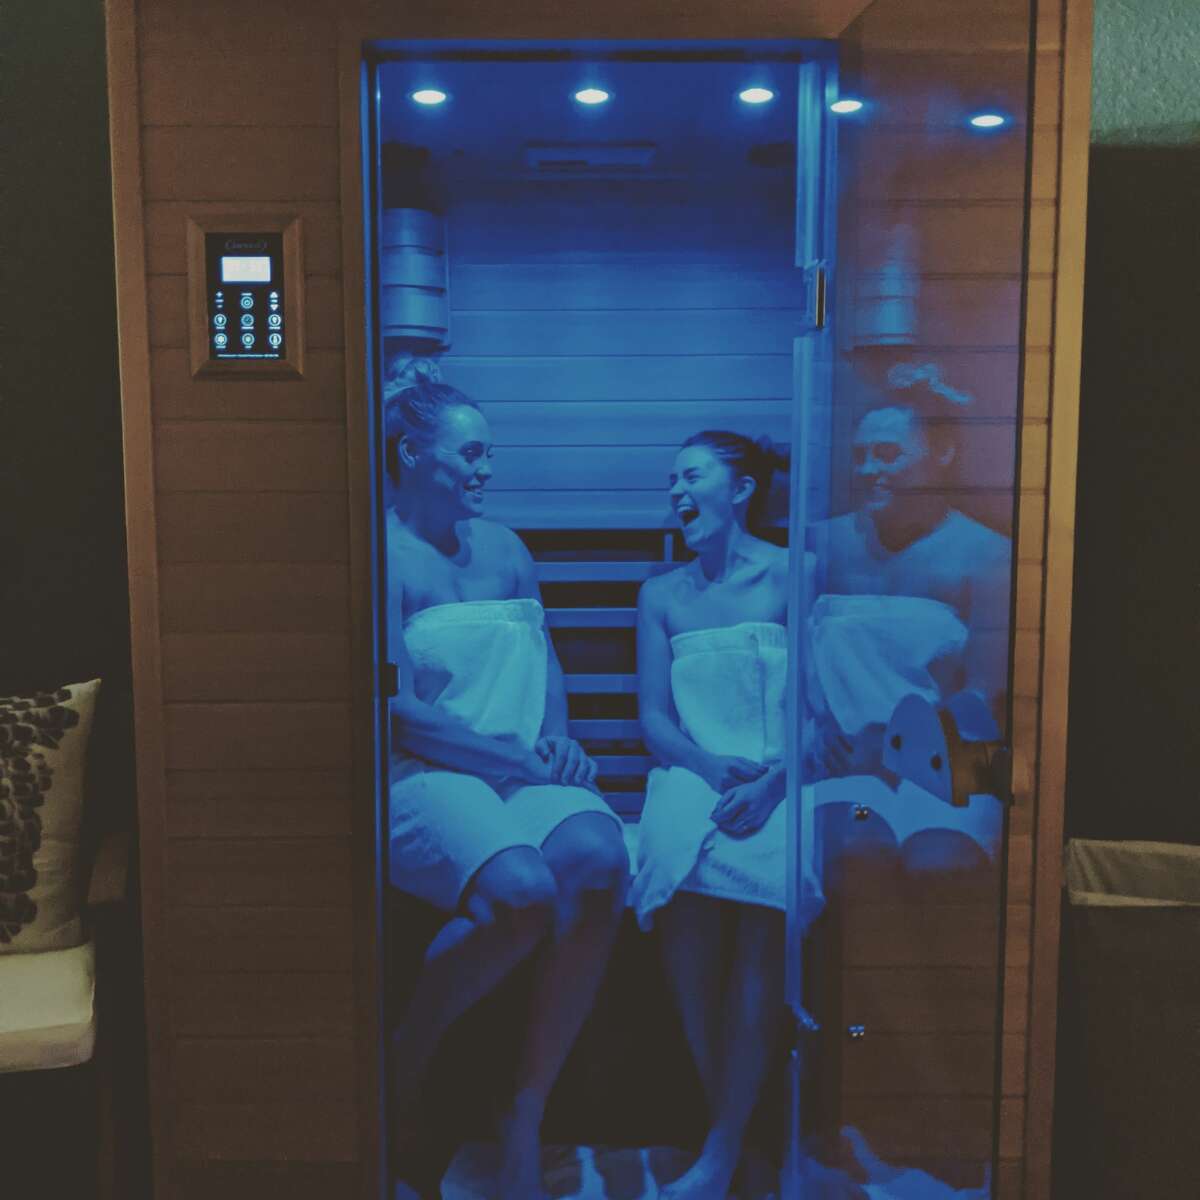 "I purchased additional Infrared Saunas for my business We Sweat West Seattle, we have several people who have purchased these saunas for their home use. We decided to become an infrared sauna dealer during these times."